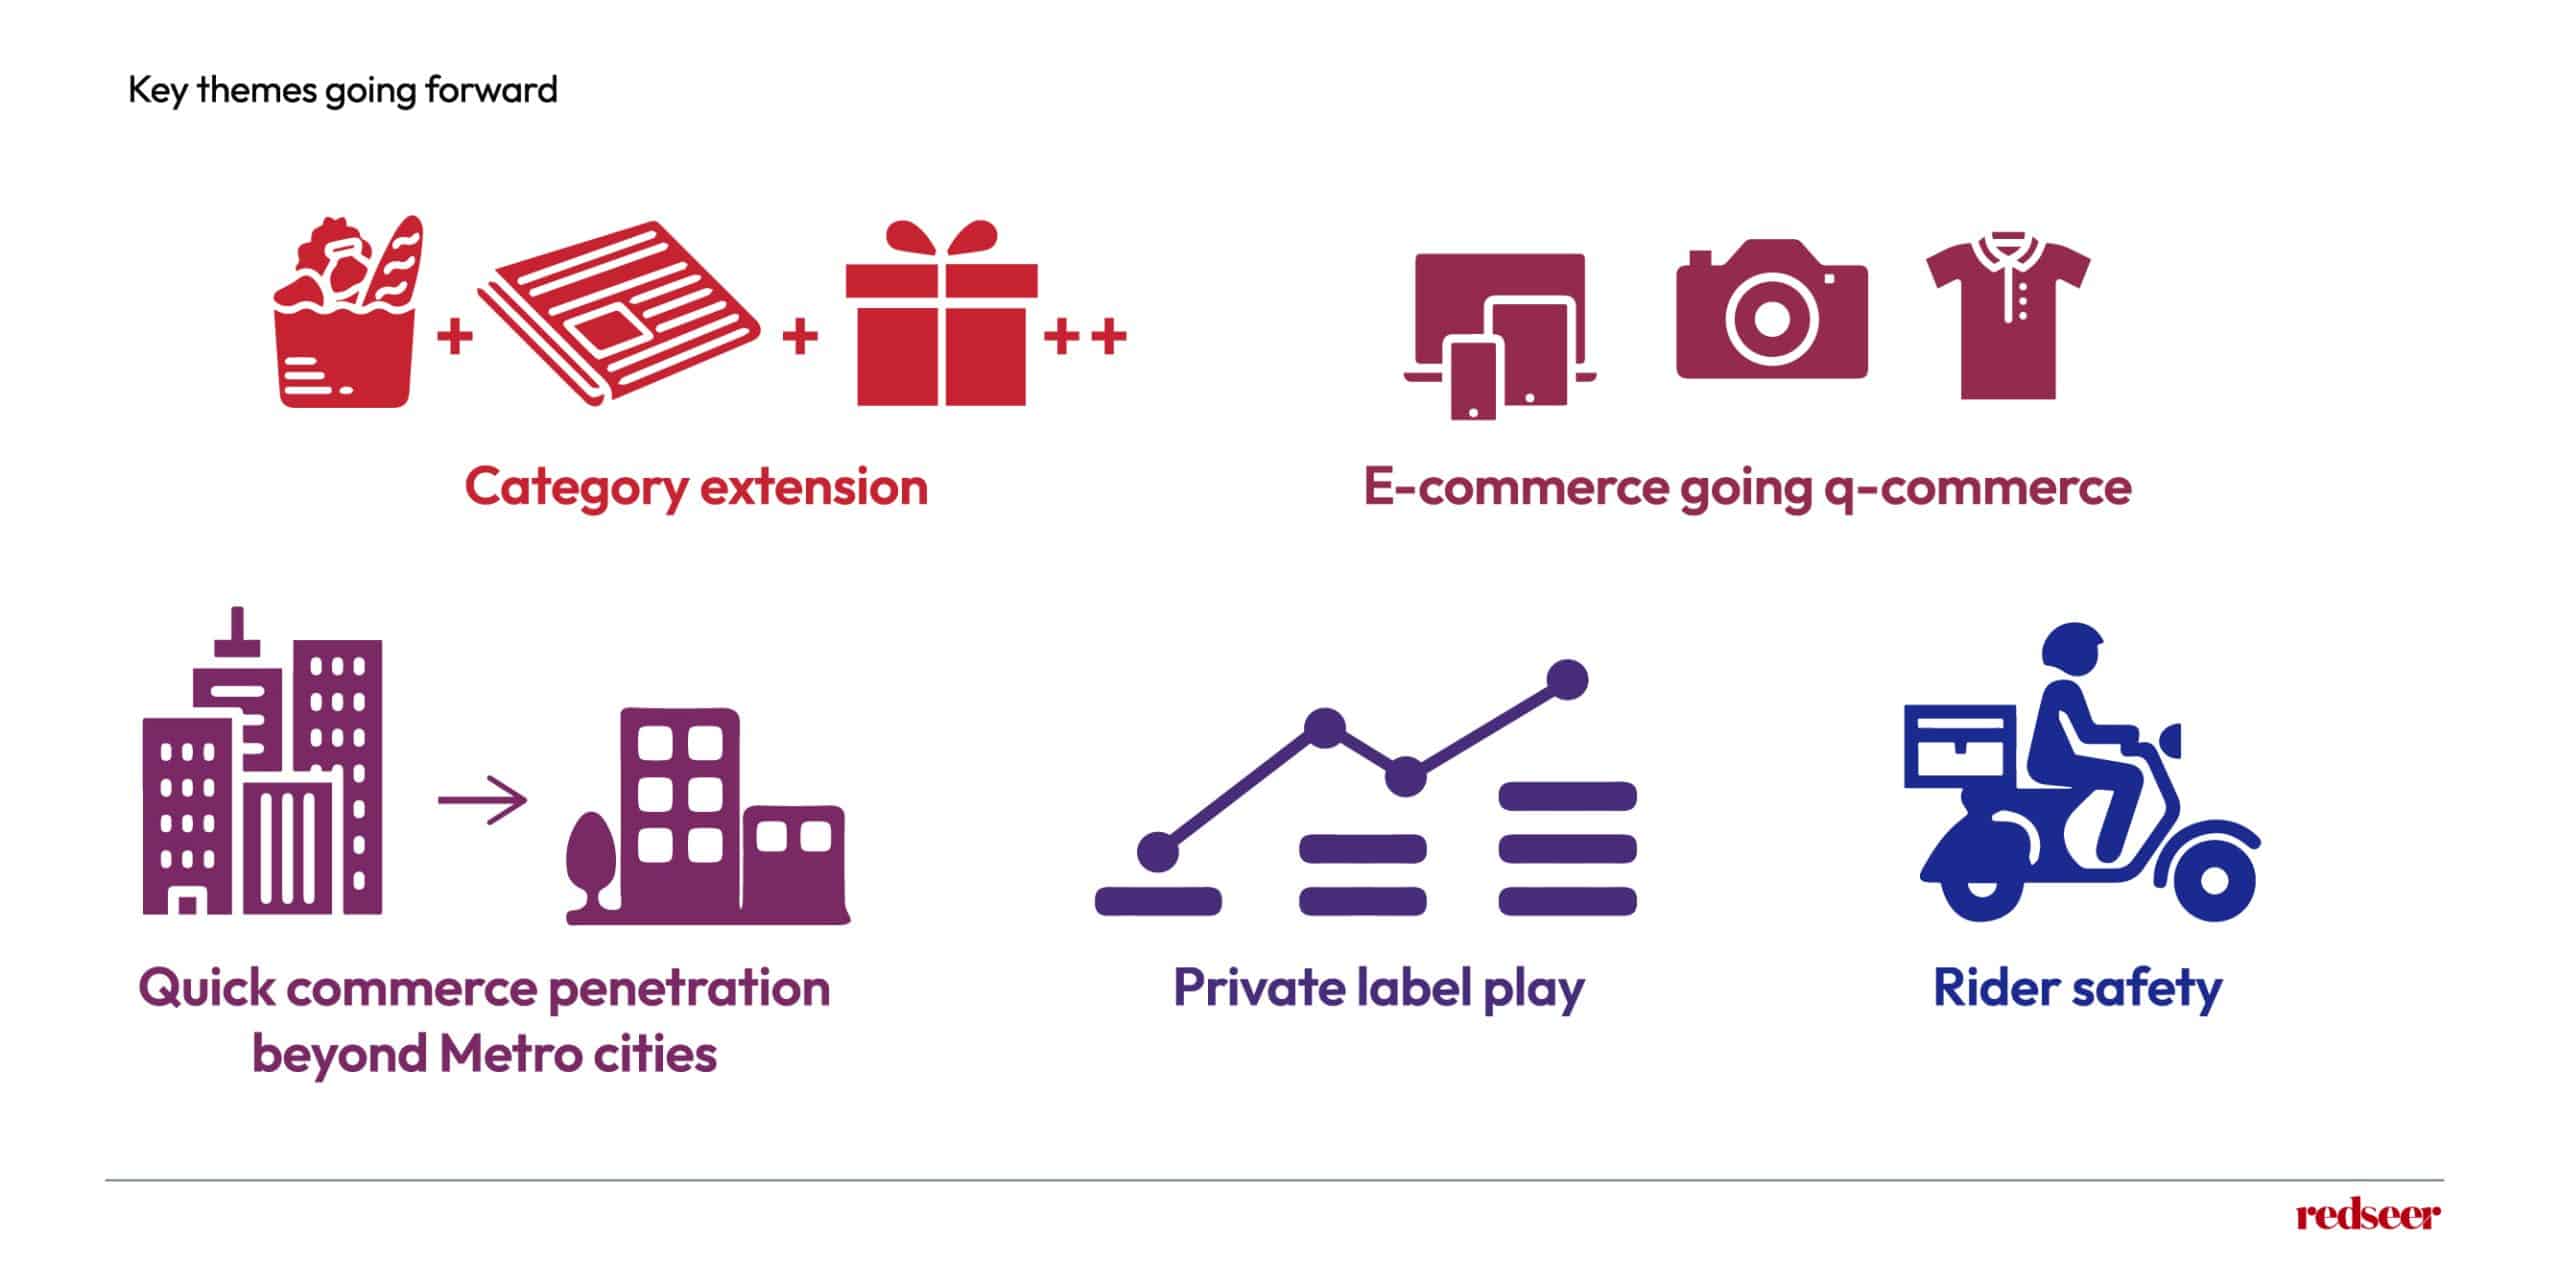 Key themes for Quick commerce in India